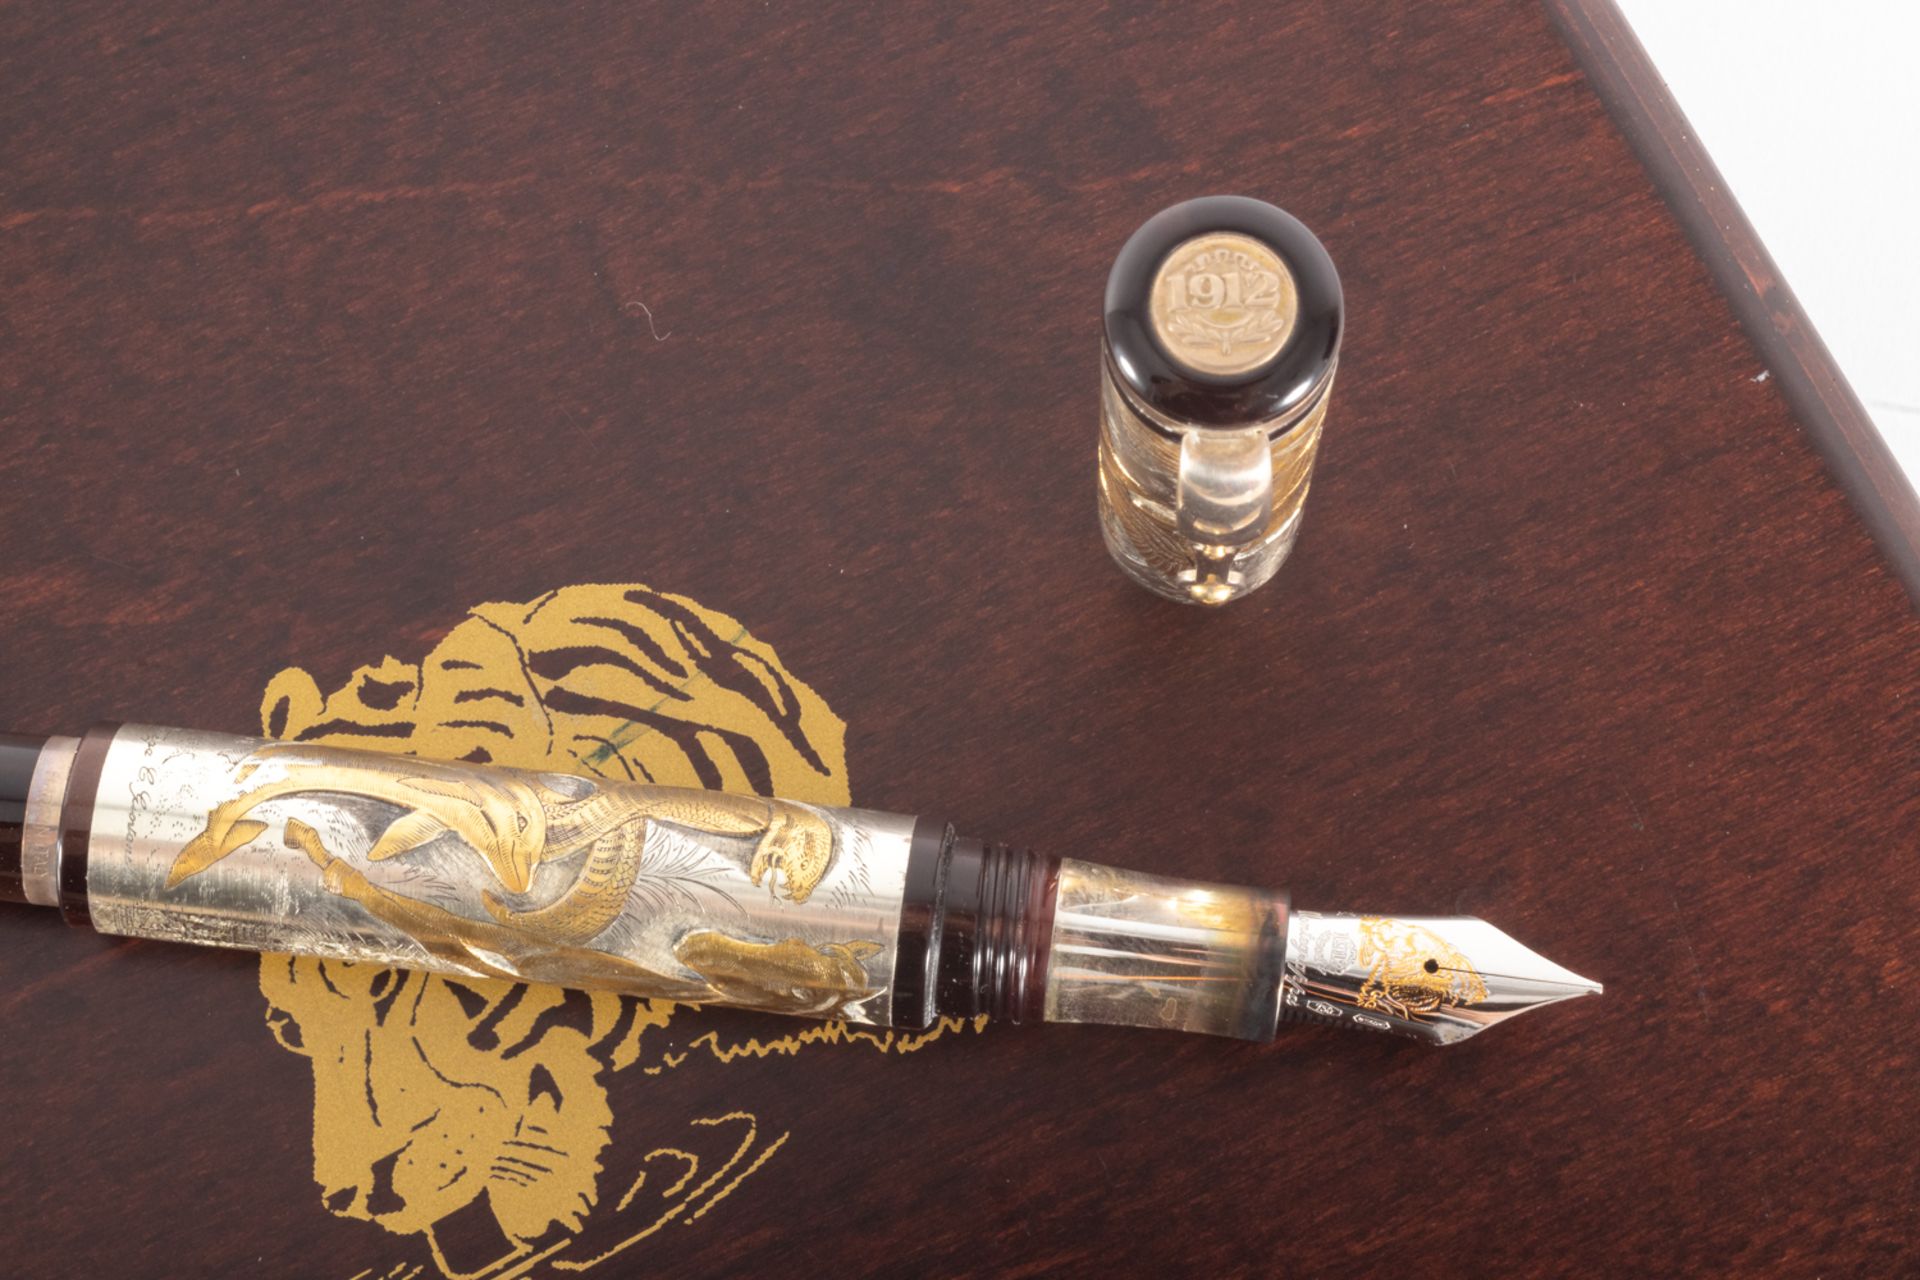 Montegrappa fountain pen "Animalia for Peace Park Foundation" collection, 2000. Limited edition numb - Bild 3 aus 3